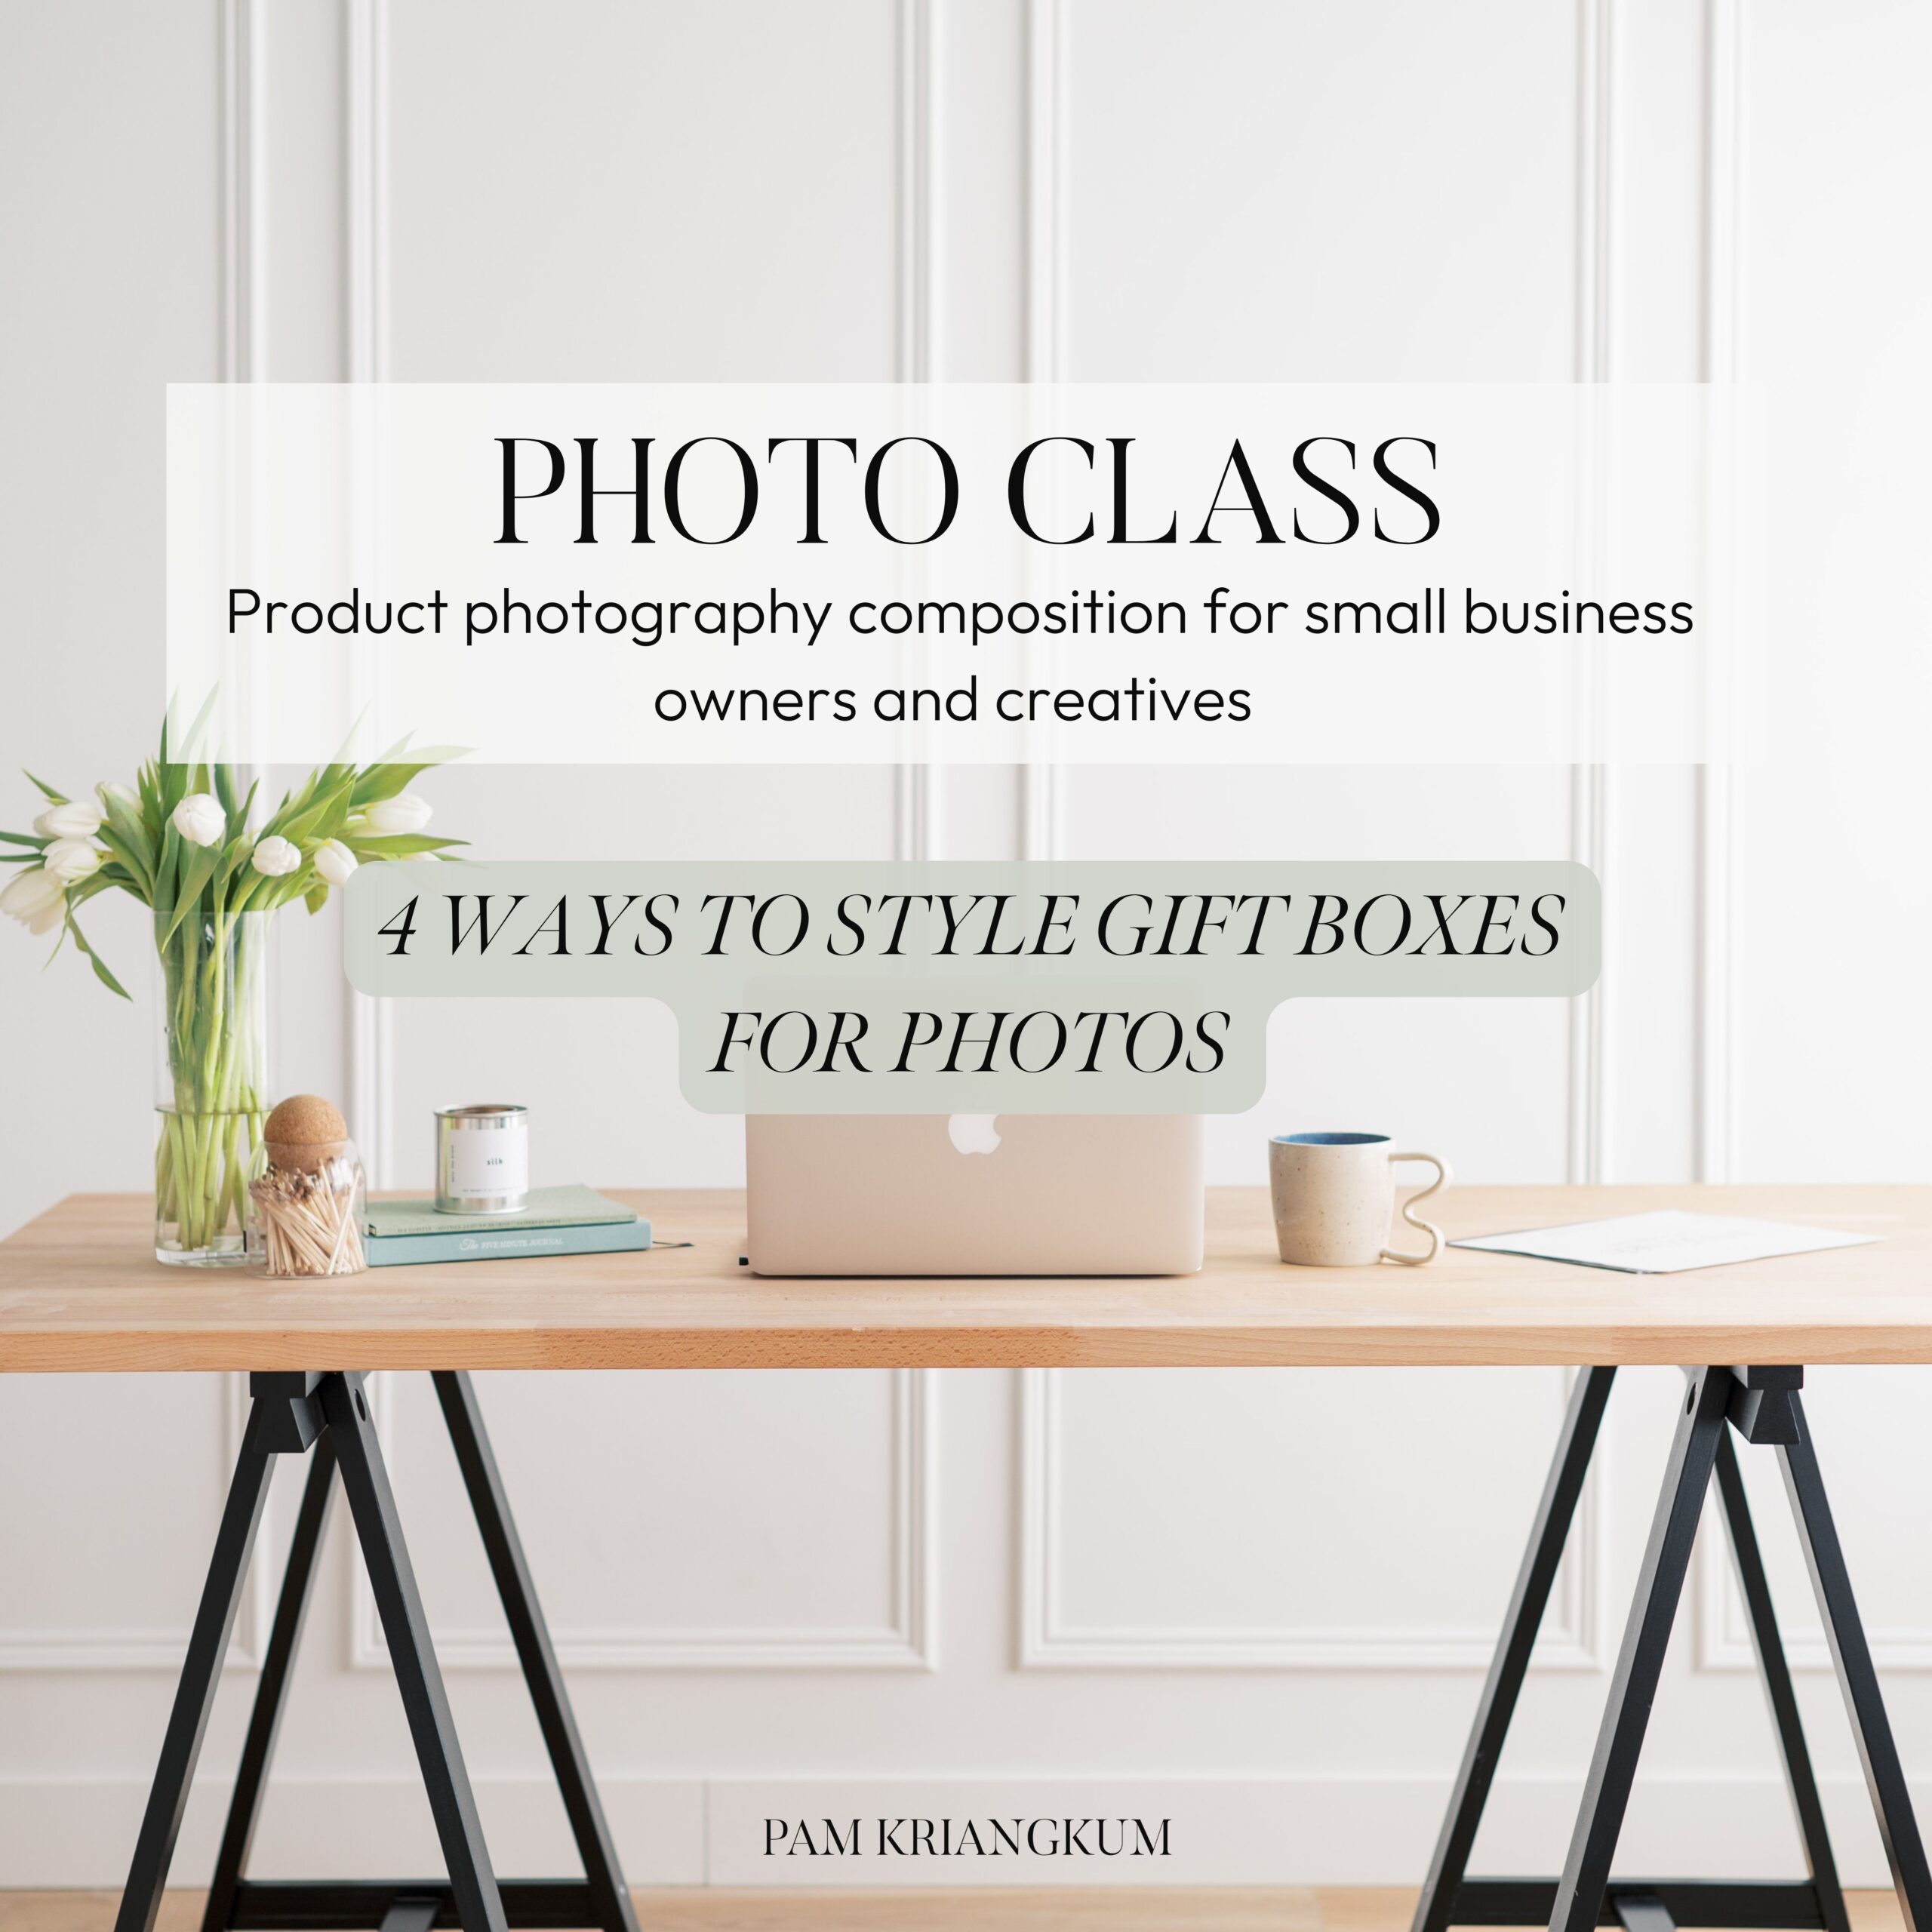 4 Ways To Style Gift Boxes For Photos